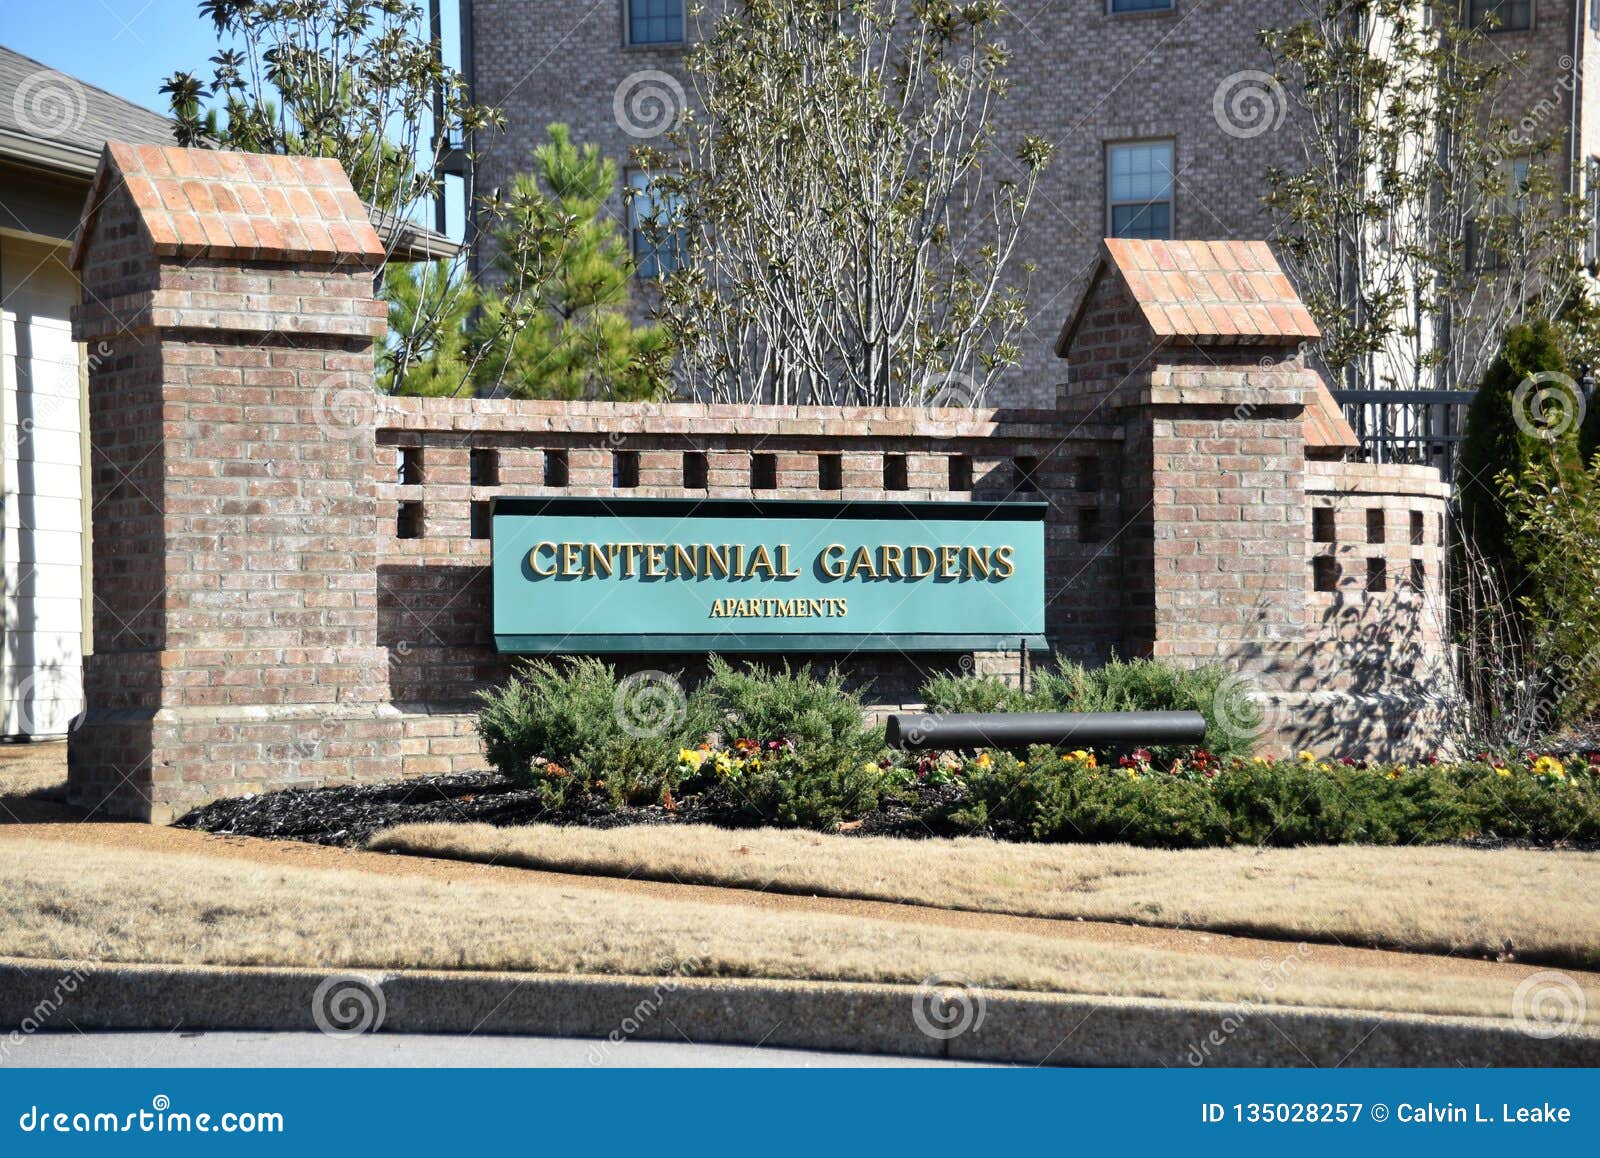 Centennial Gardens Apartments Olive Branch Ms Editorial